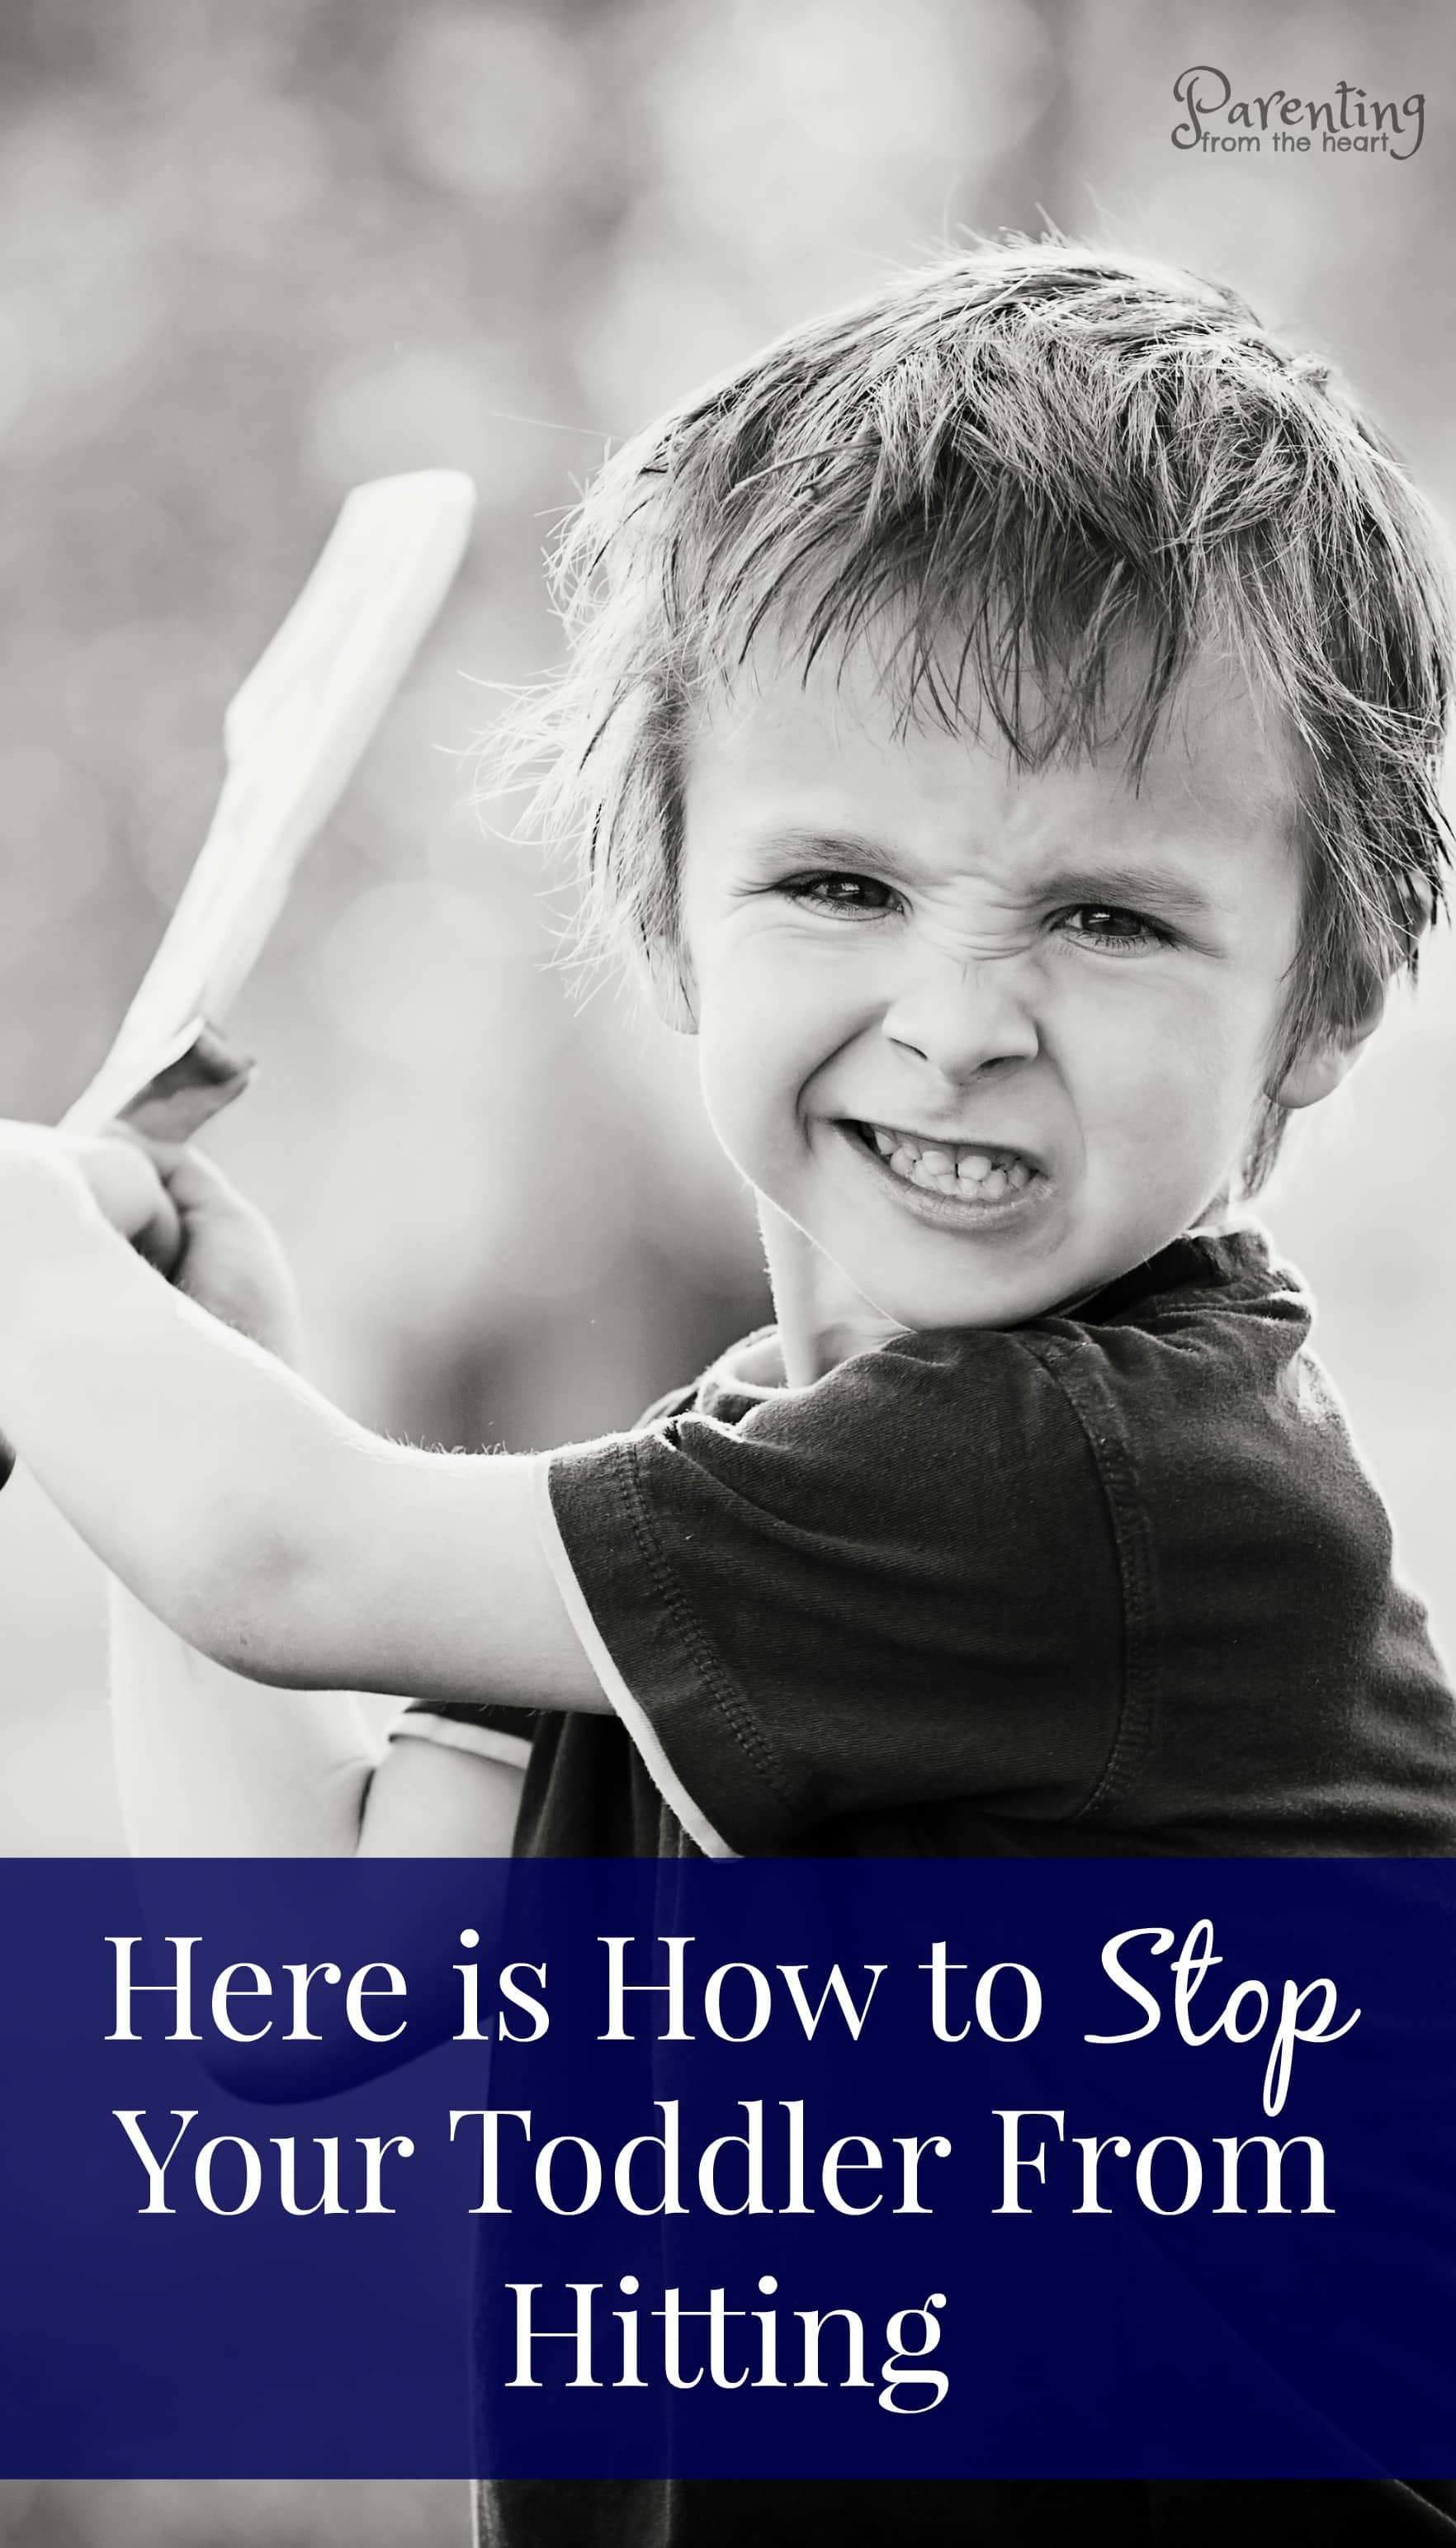 How to Stop Toddler Hitting Without the Use of Punishment